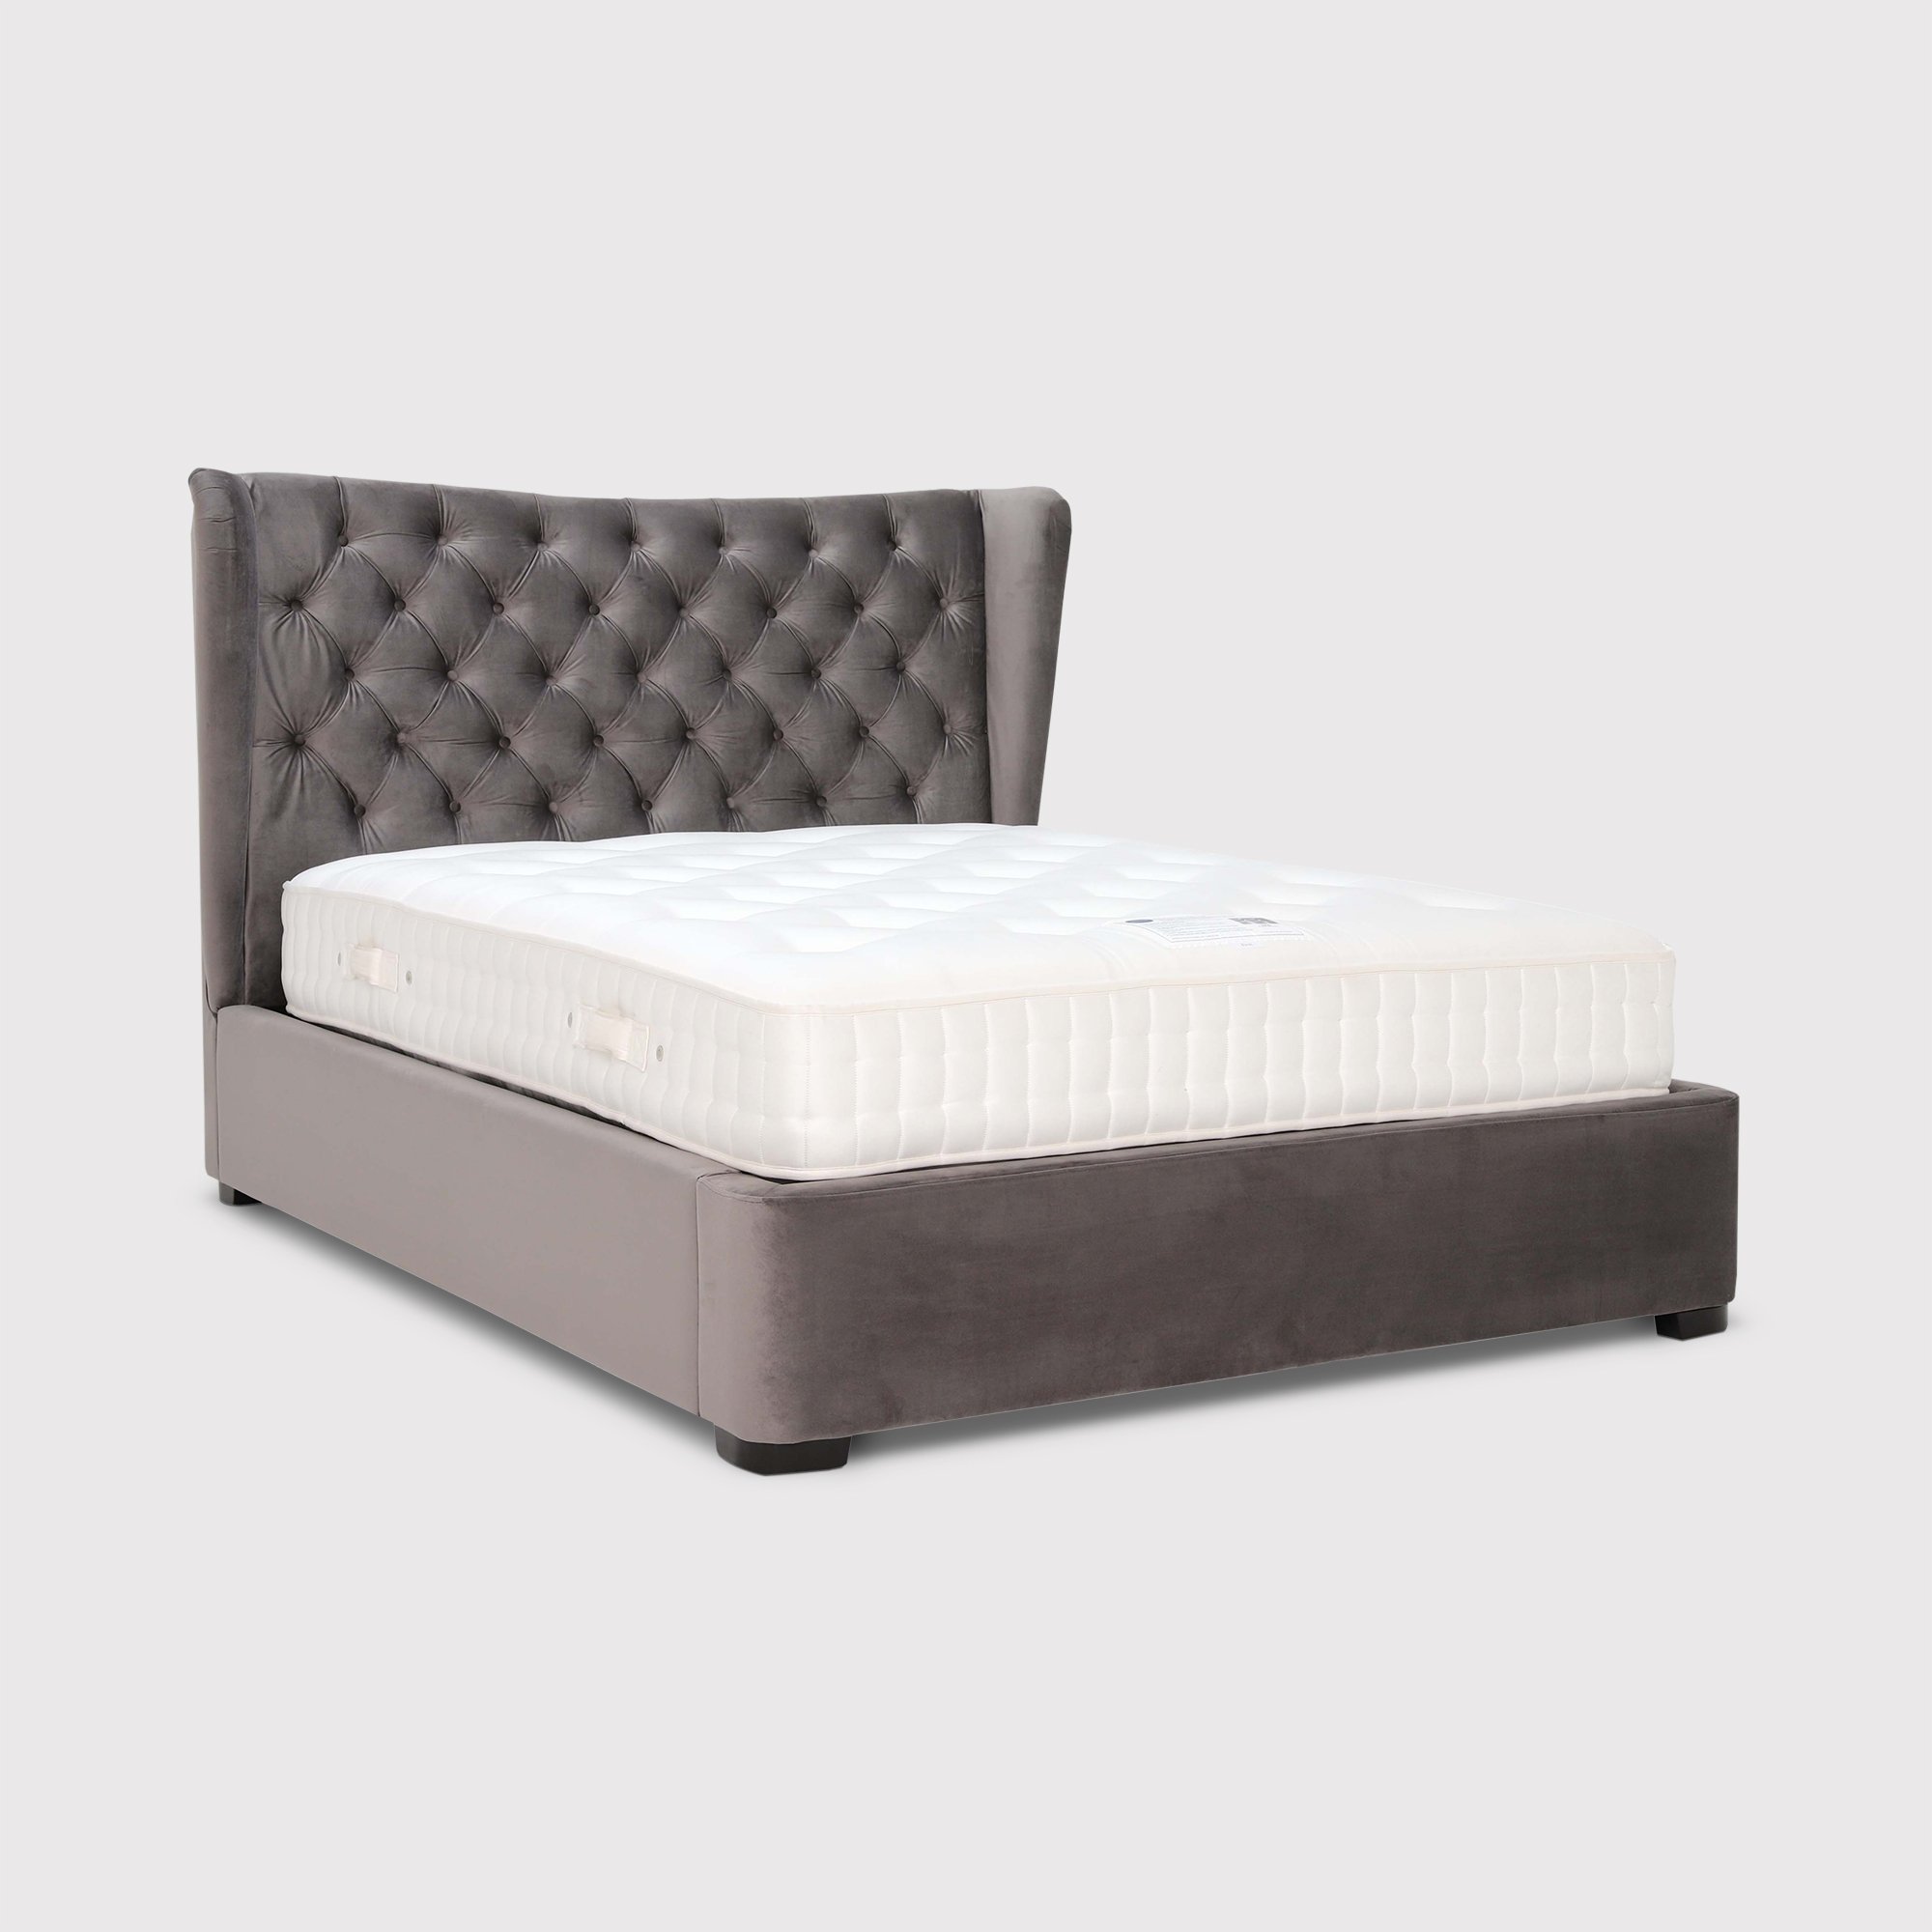 Sojourn 150cm Bed With Lift Up, Grey | King | Barker & Stonehouse